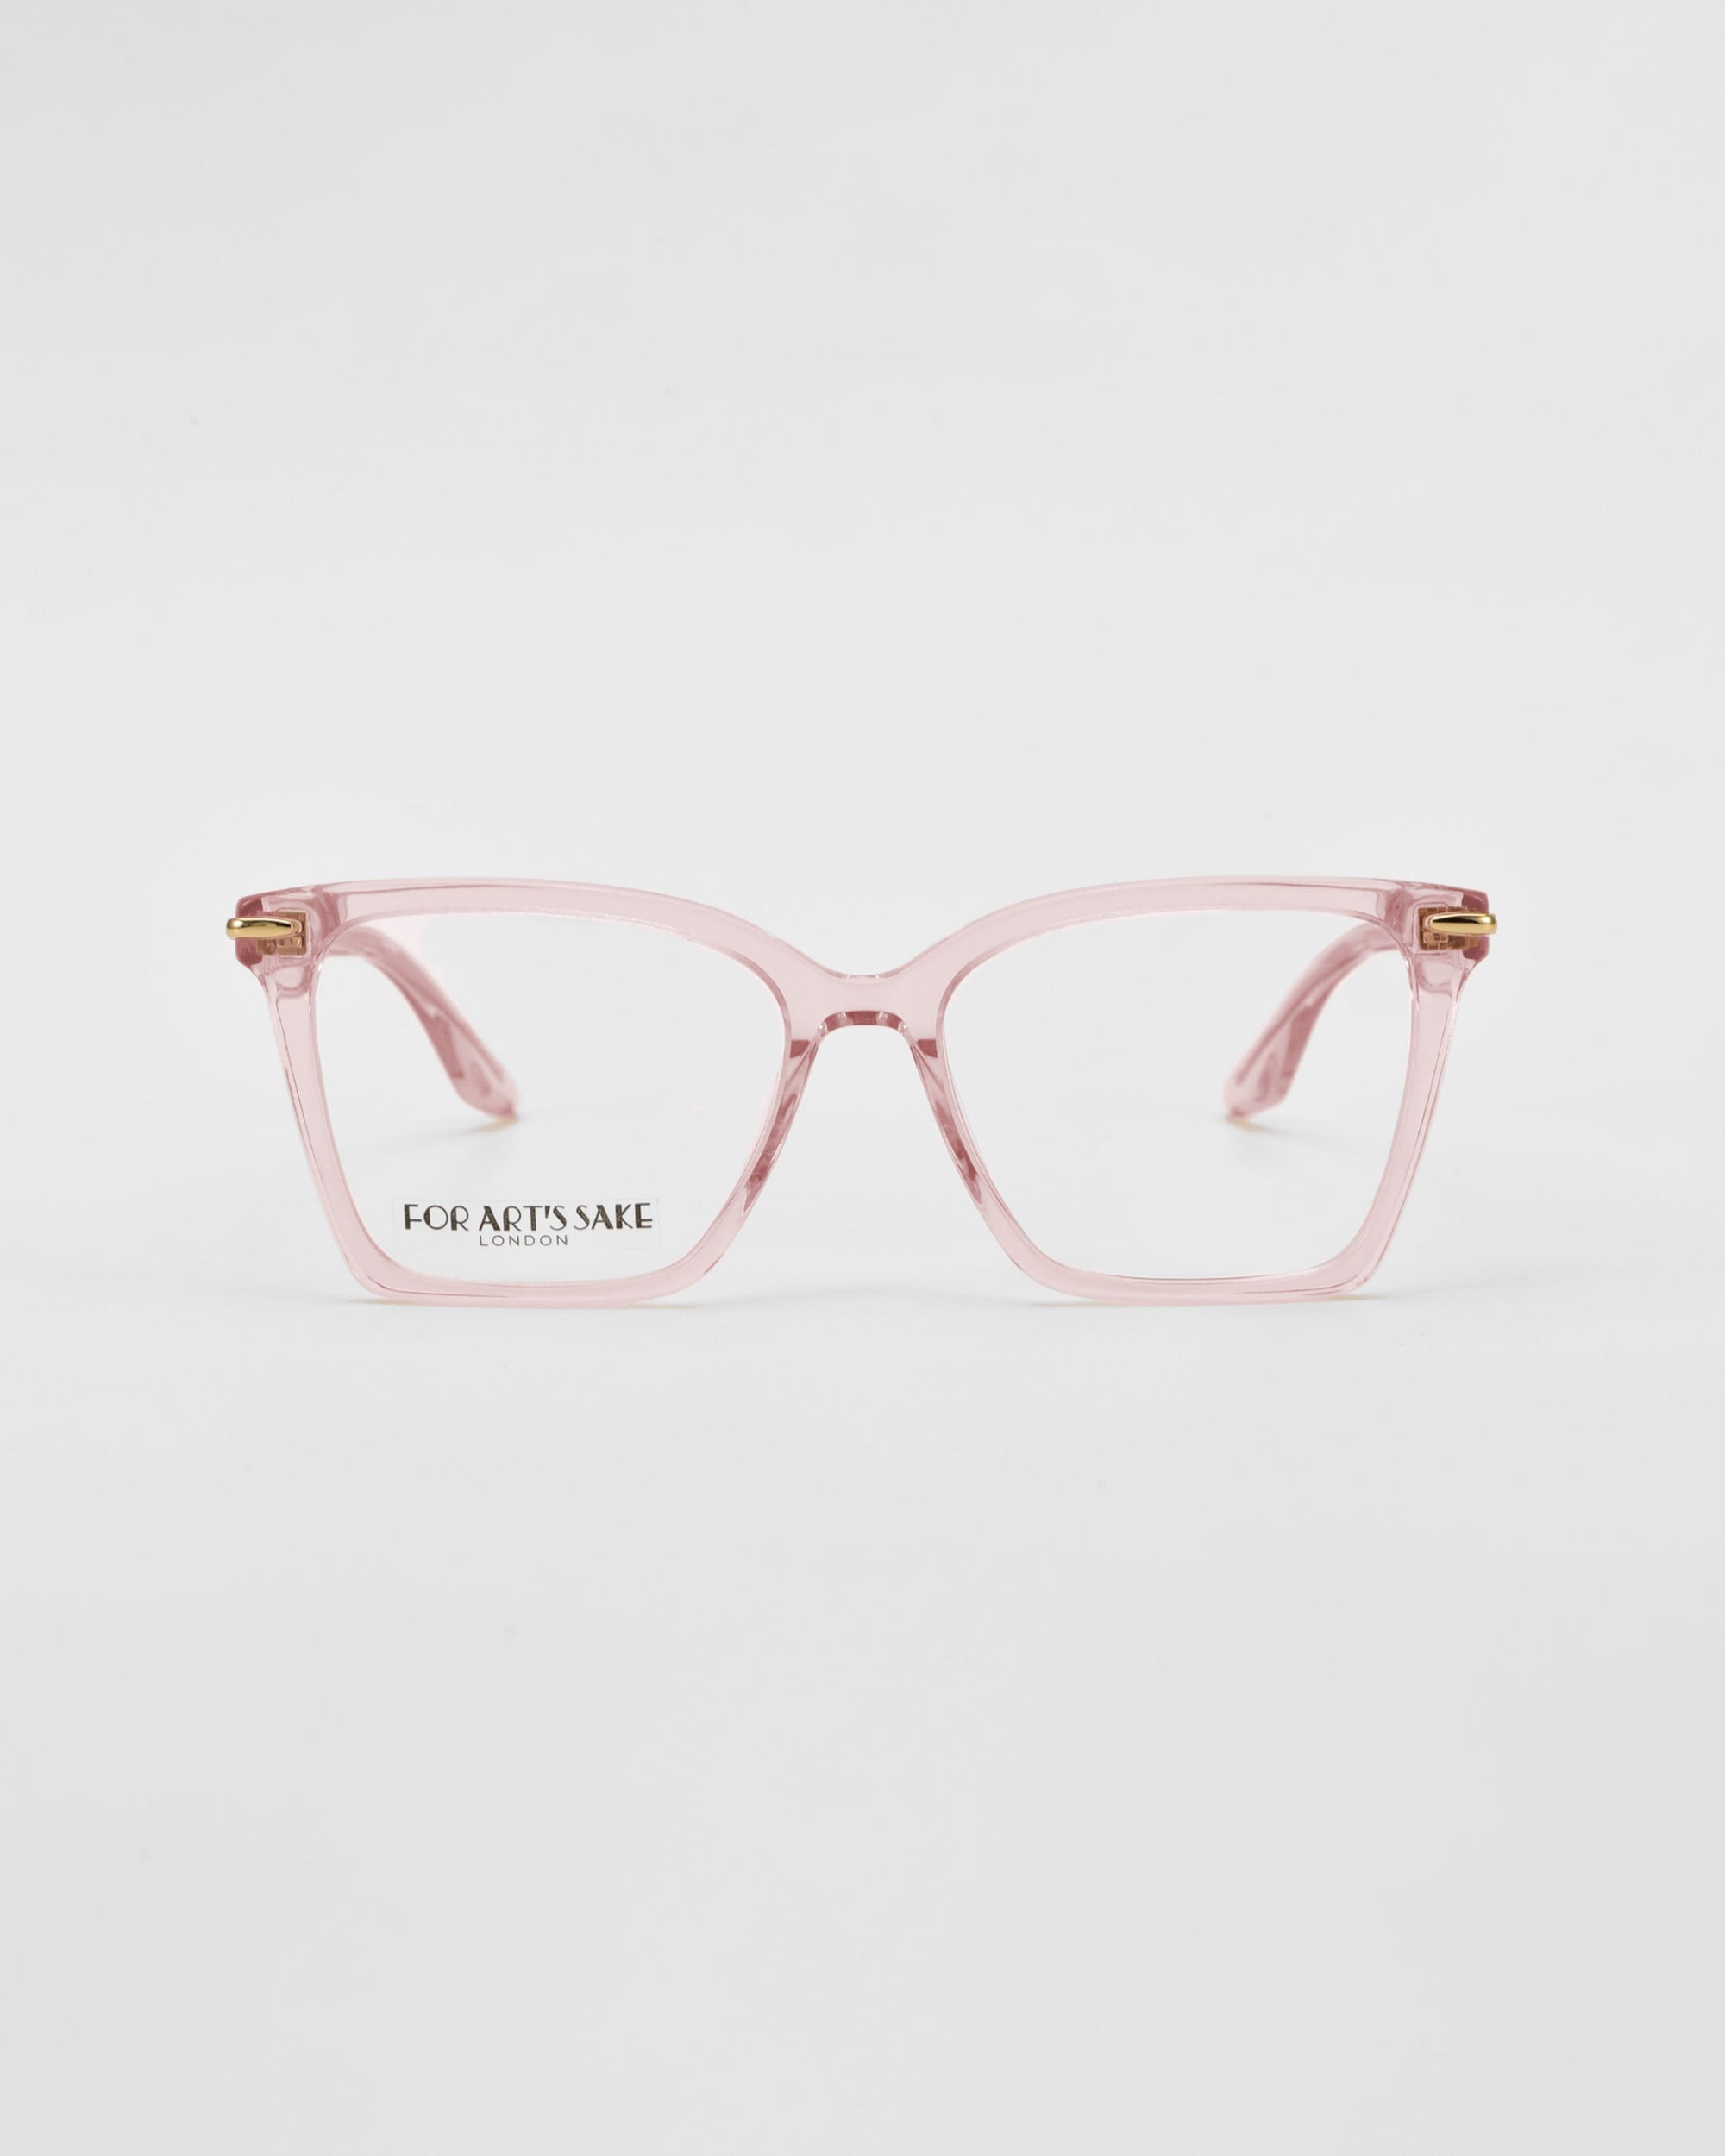 A pair of light pink eyeglasses with a slight cat-eye shape and gold accents on the temples, crafted from glossy acetate. The phrase "For Art's Sake® Azure" is visible on the inner side of one of the lenses. The background is plain white.